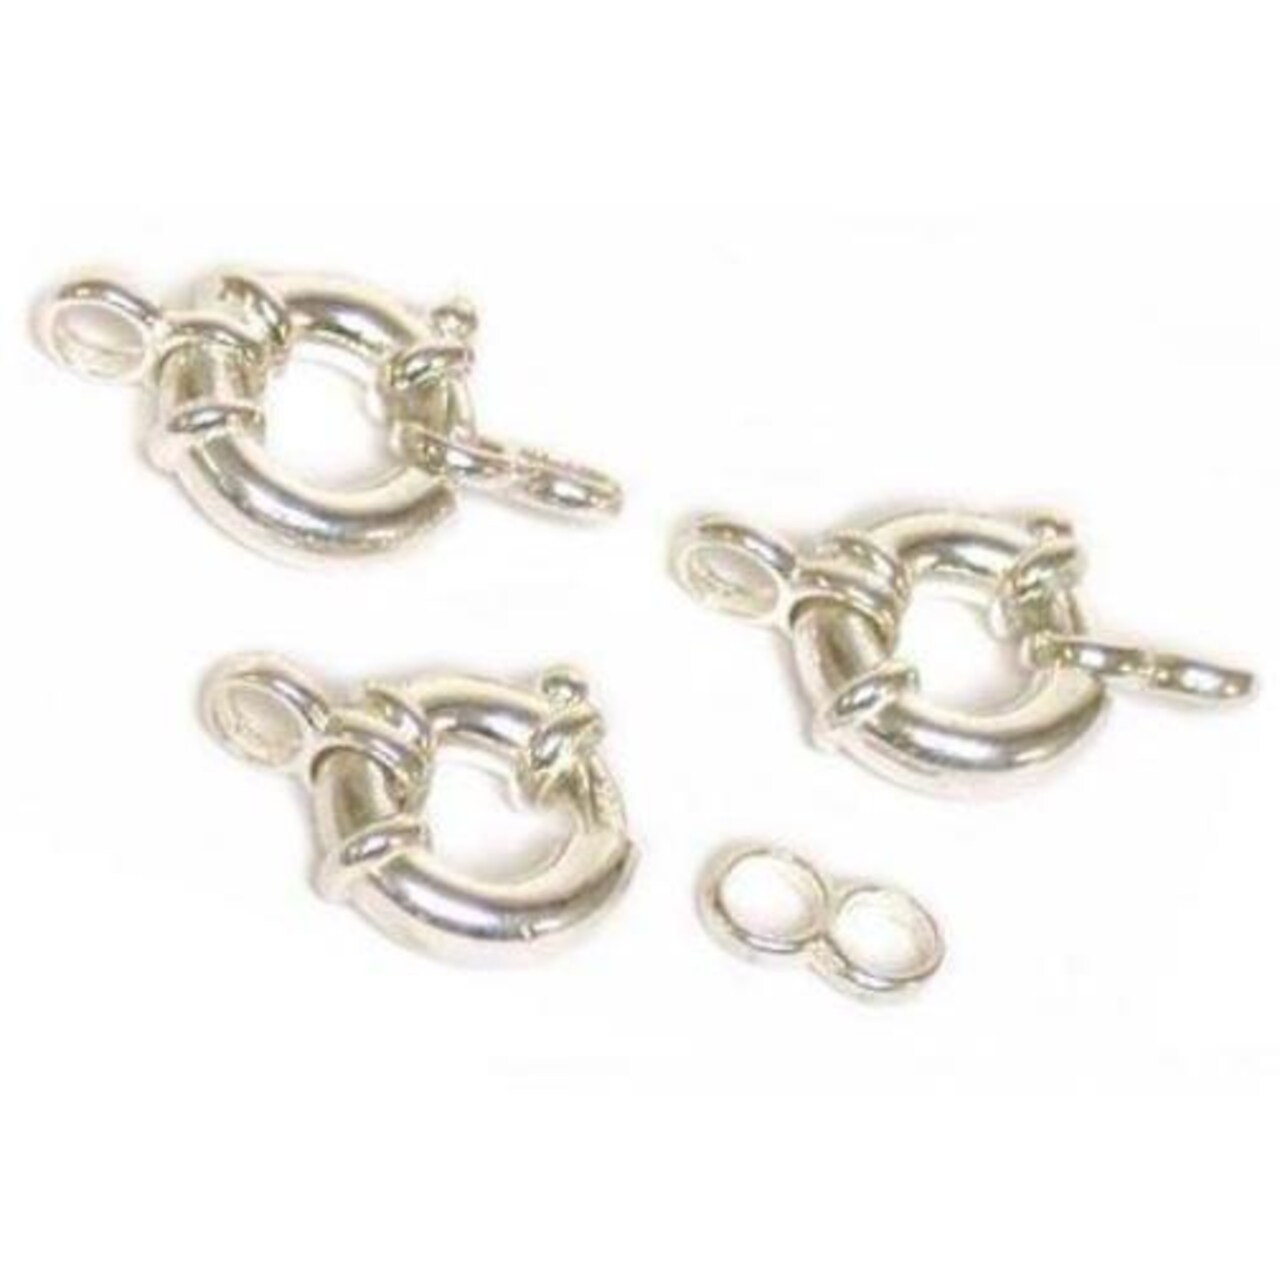 3 Sterling Silver Bolt Spring Ring Toggle Clasp 12mm